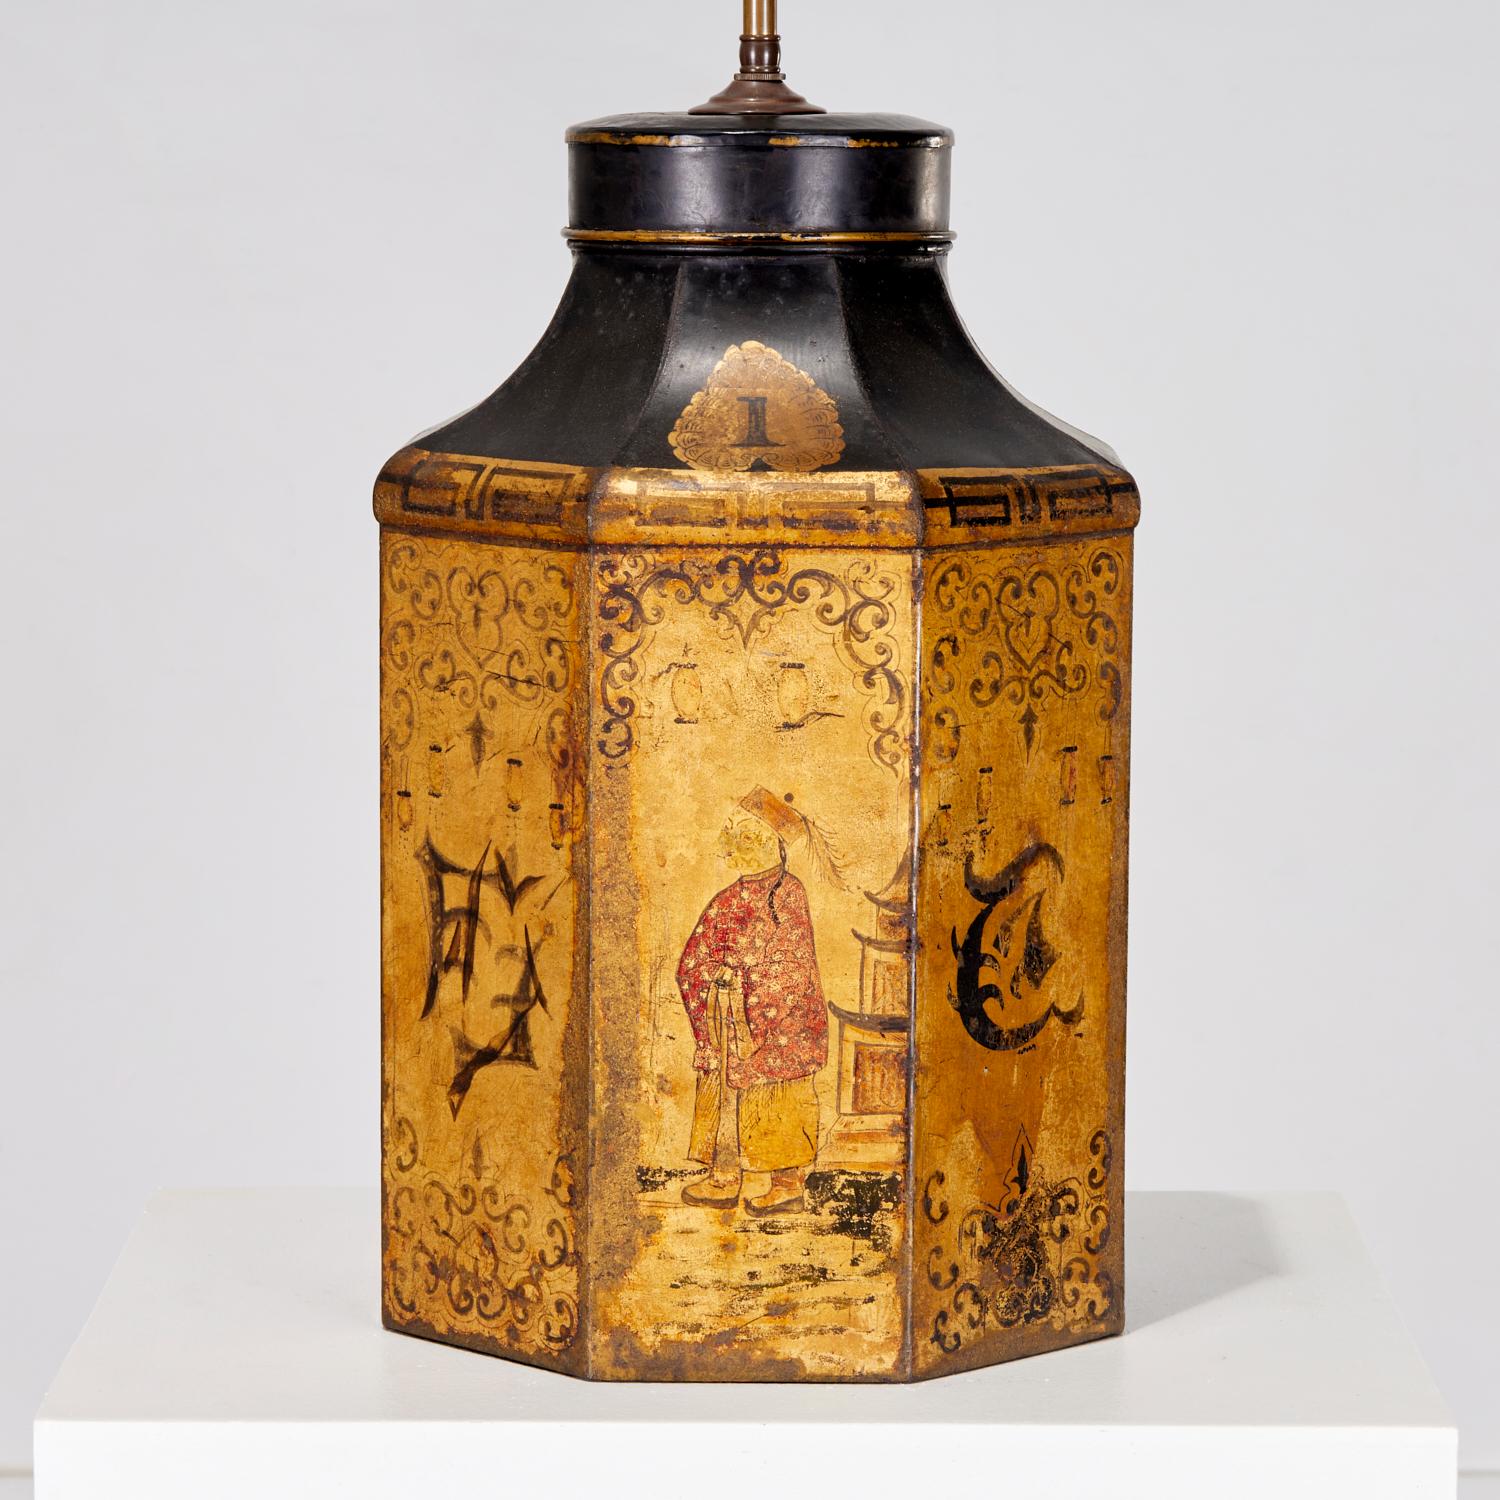 Late 19th c. , black and gold painted English tea canister with Chinoiserie decoration, mounted as 3-light table lamp with tall brass finial.

This lamp has great character and the painting is quite charming. The lovely hanging lanterns suggest a